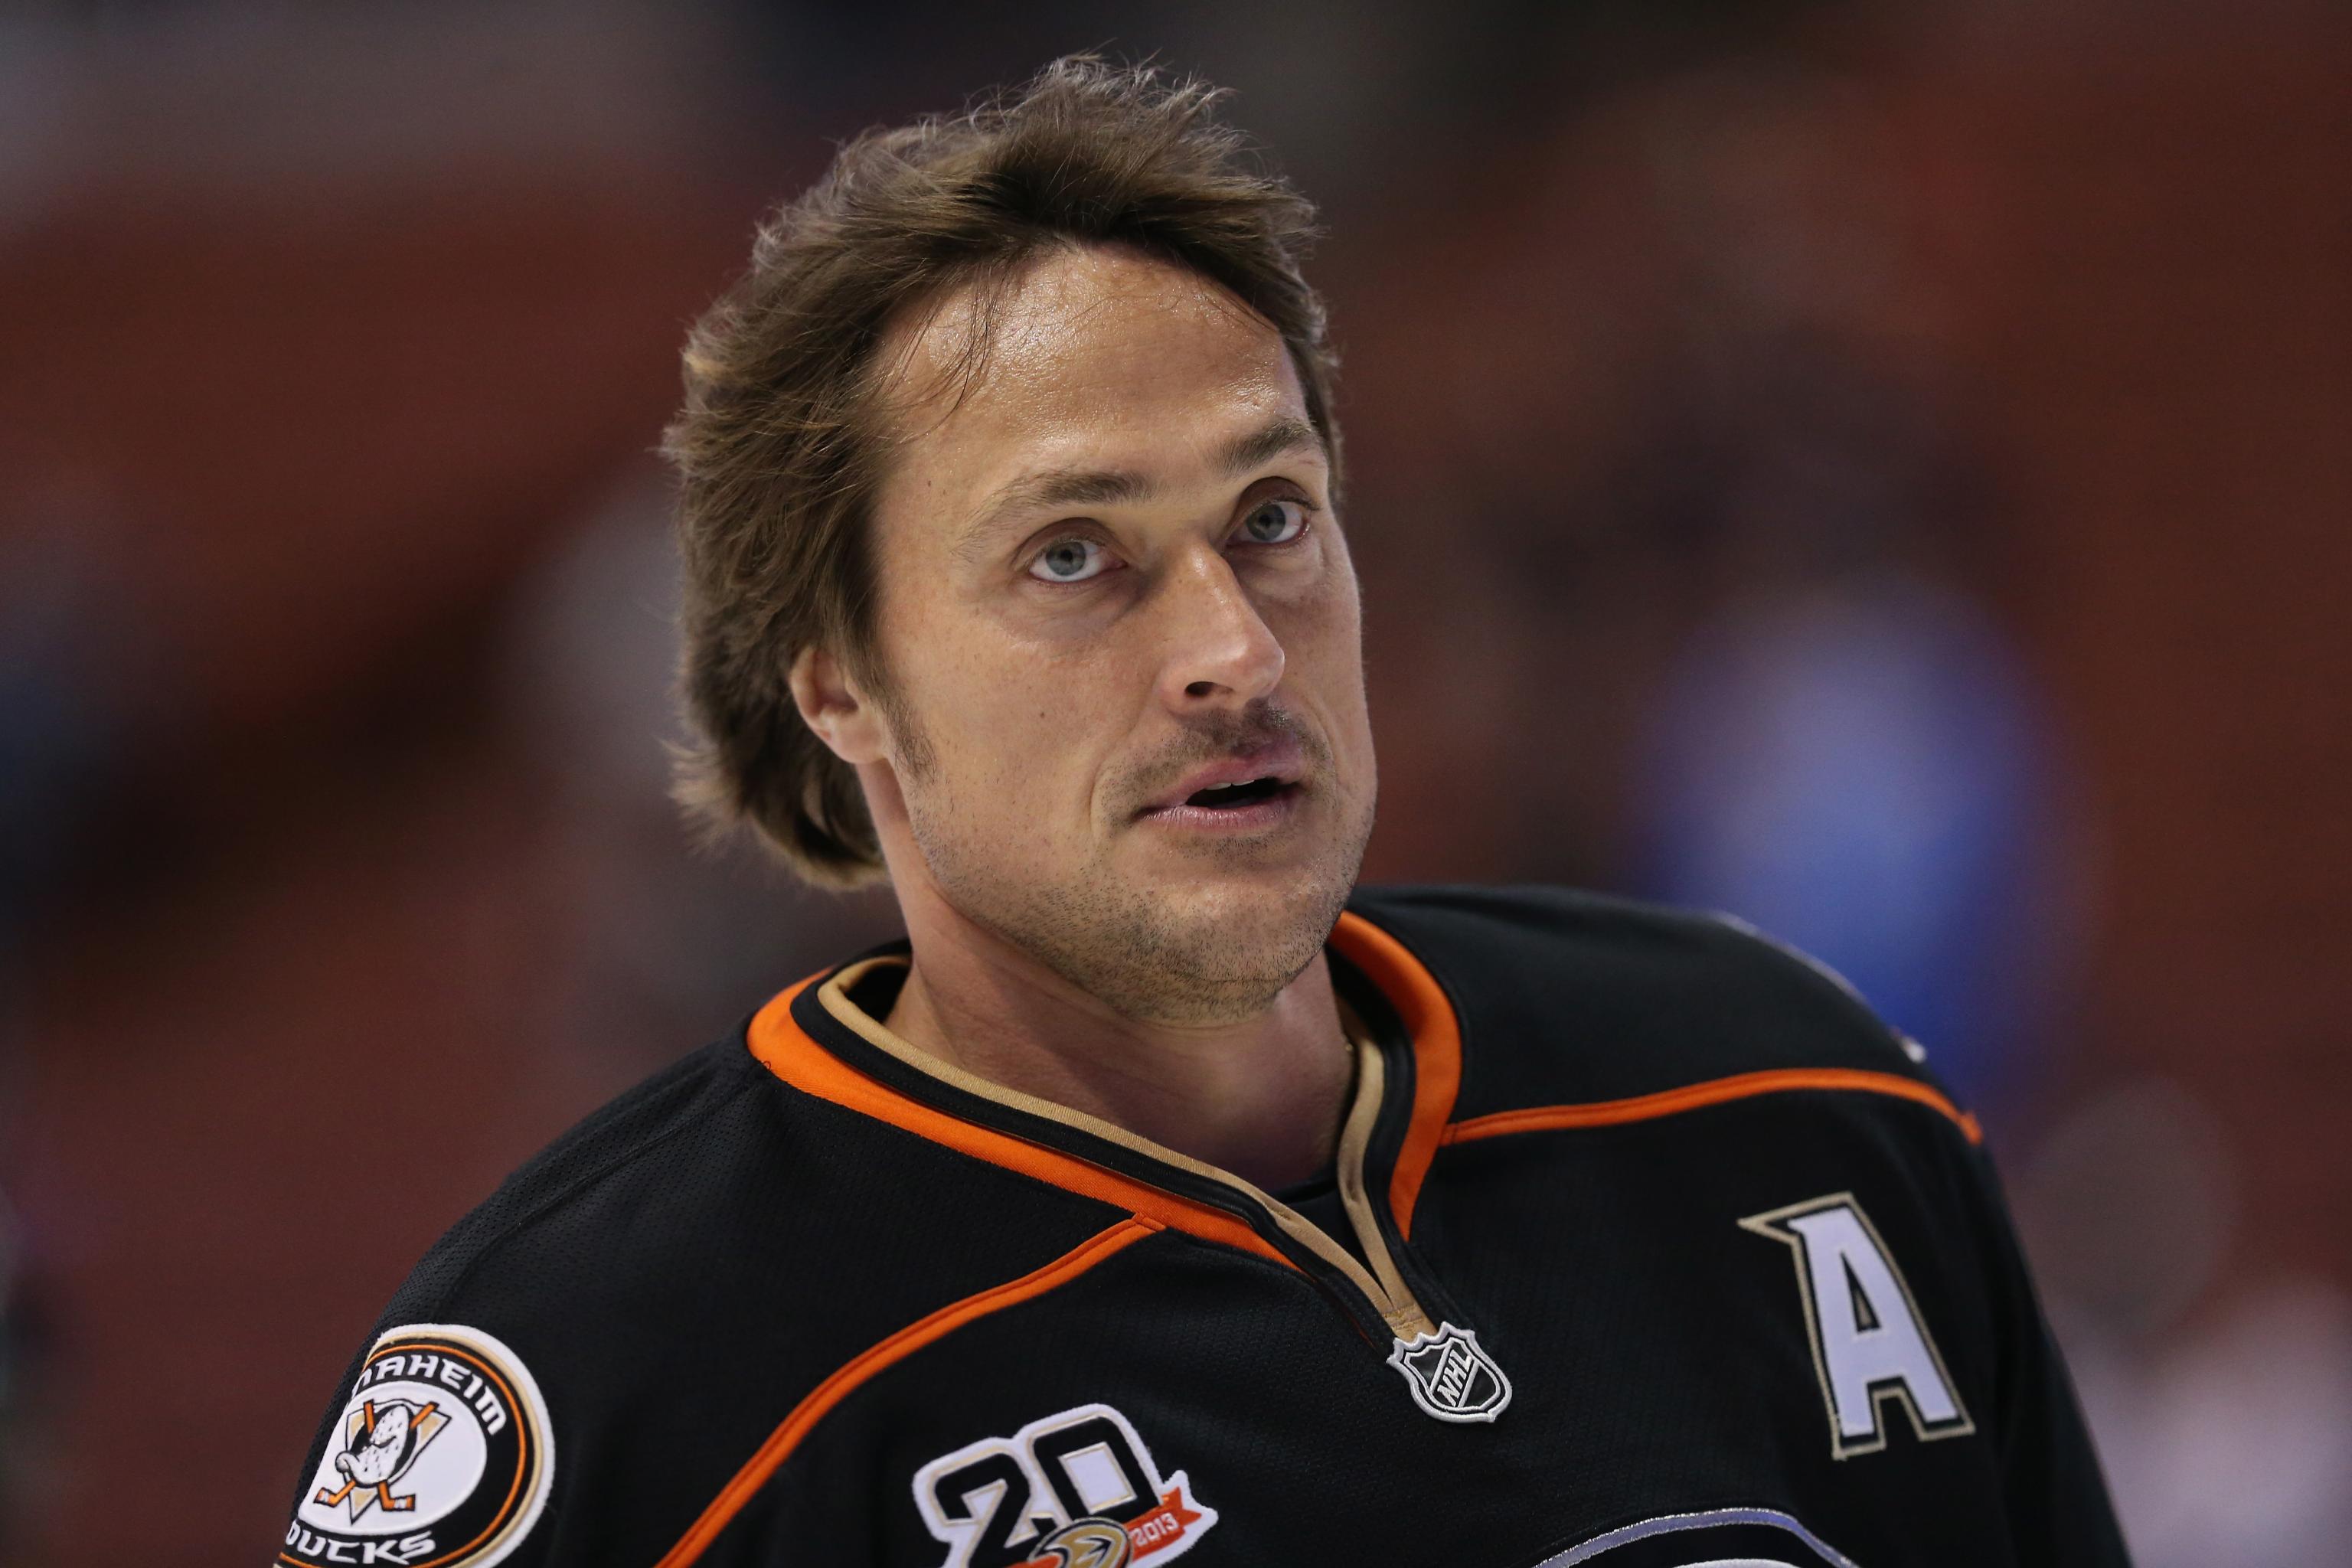 Teemu Selanne says farewell – probably – after Kings beat Ducks in playoffs, NHL